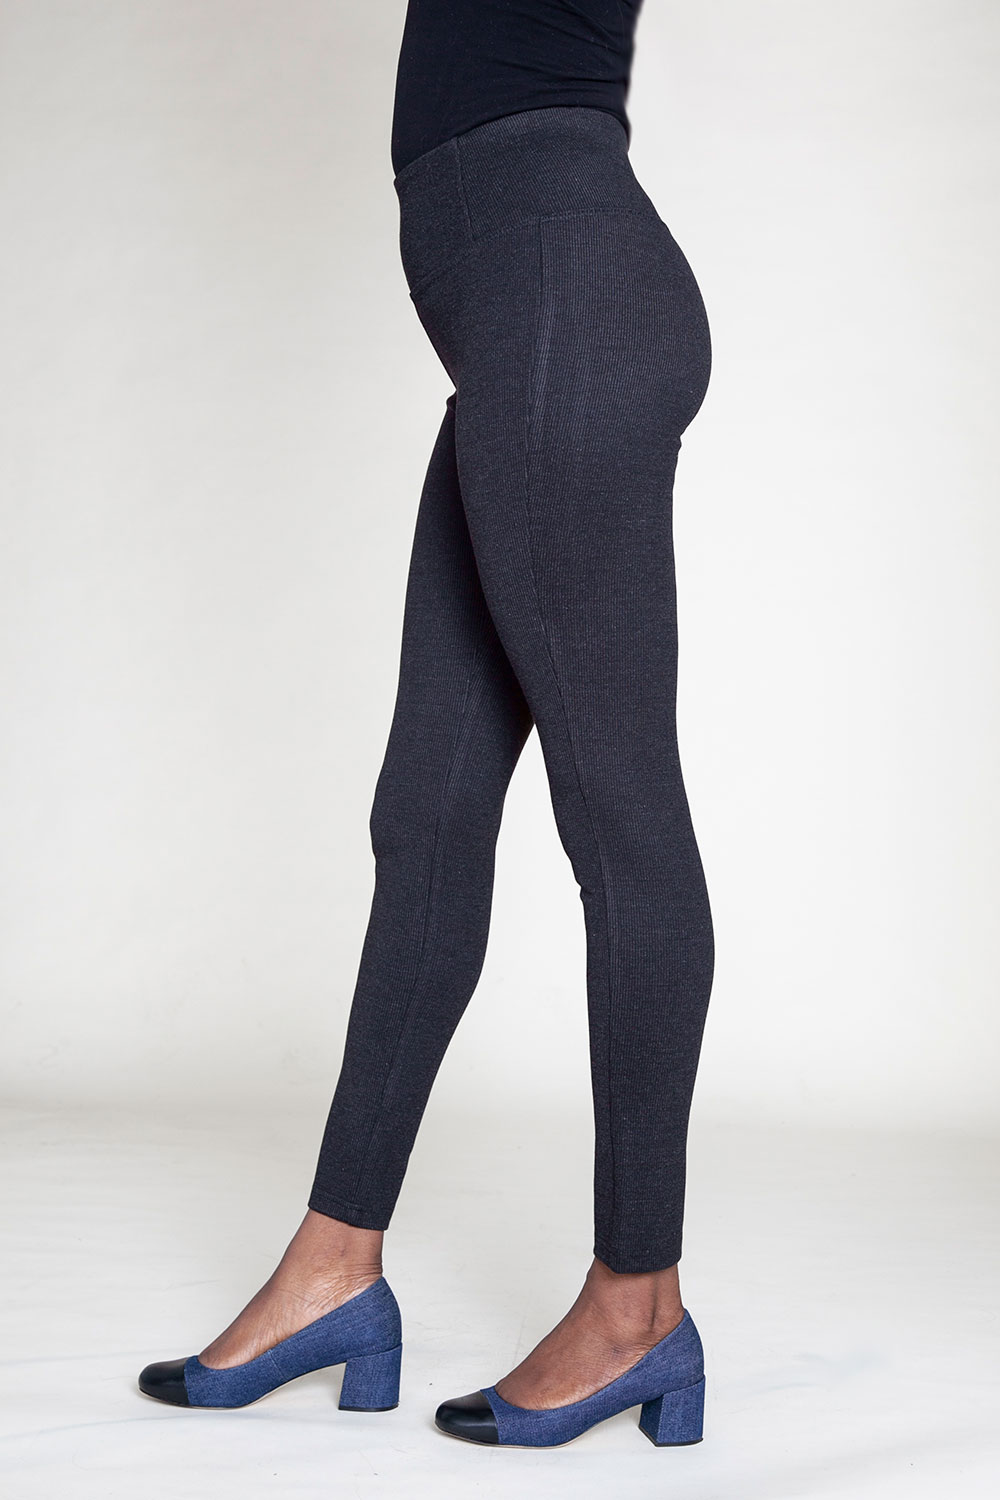 grey high waisted jeggings